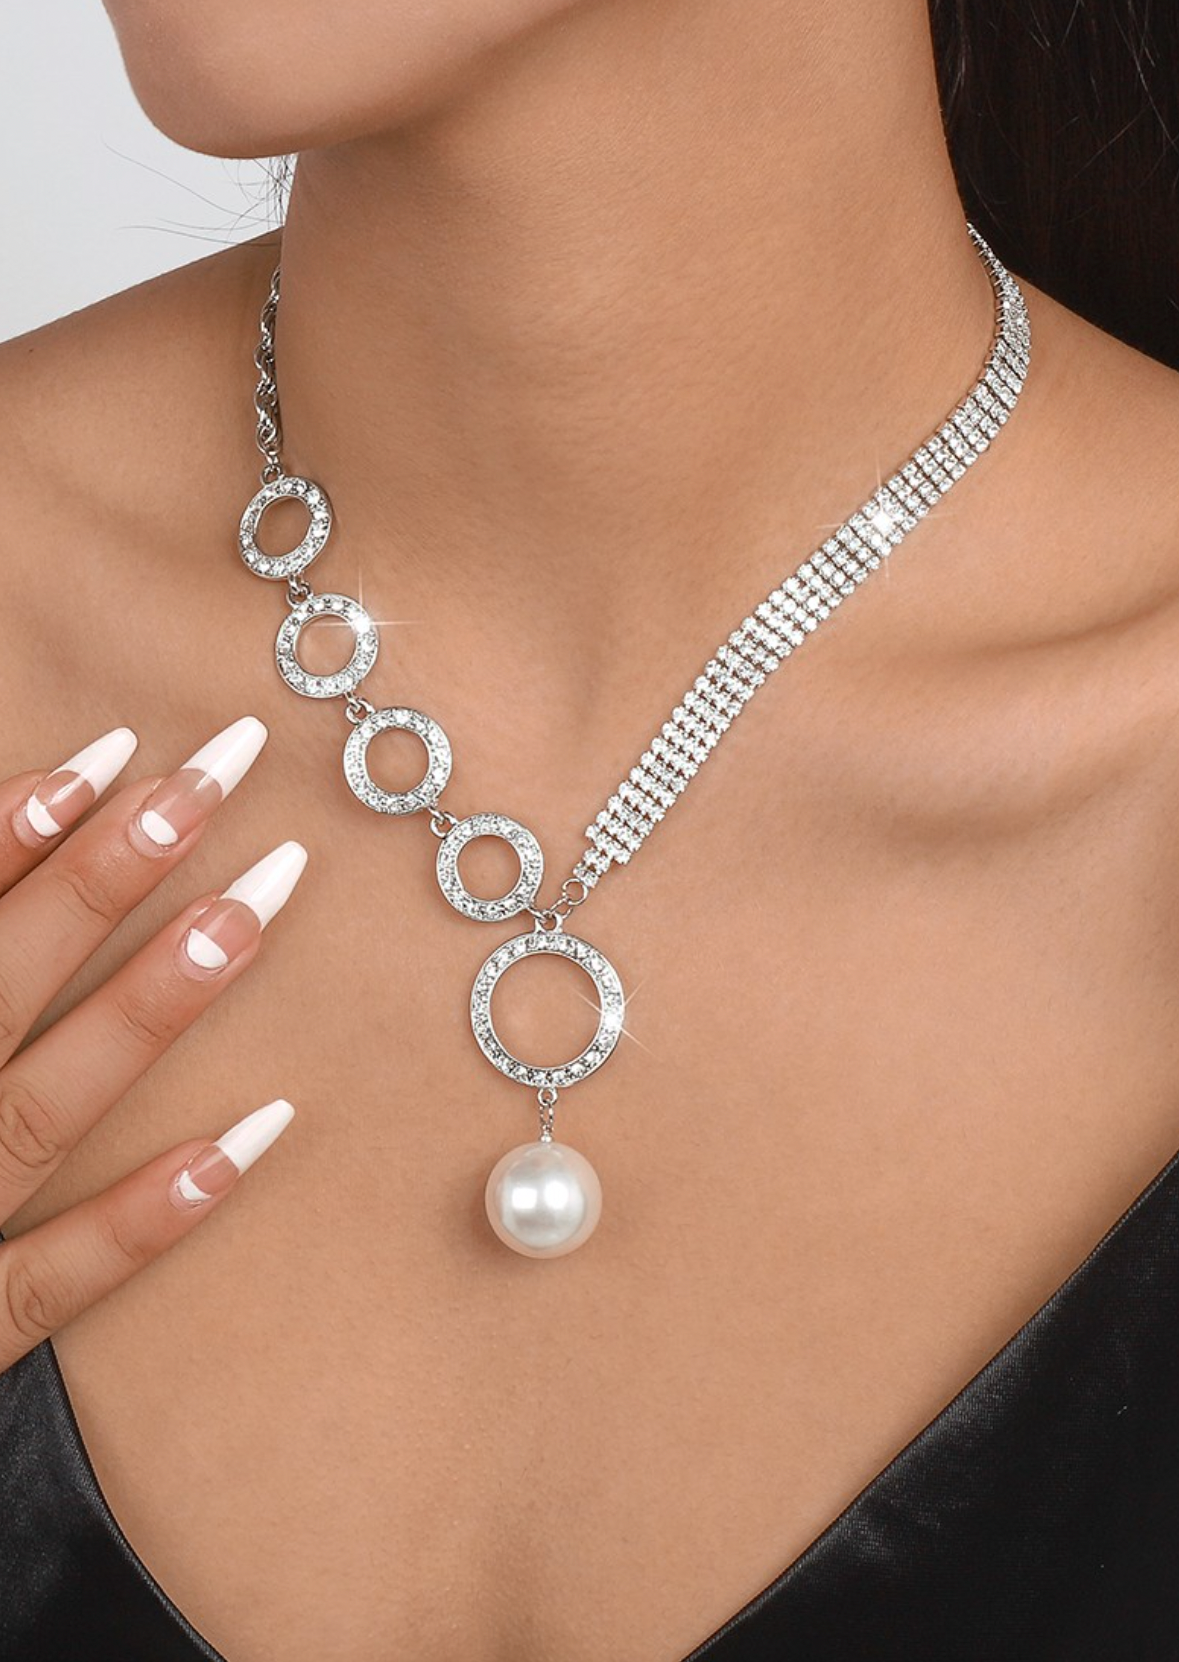 Sexy Large Pearl Pendant Crystal Chain Necklace